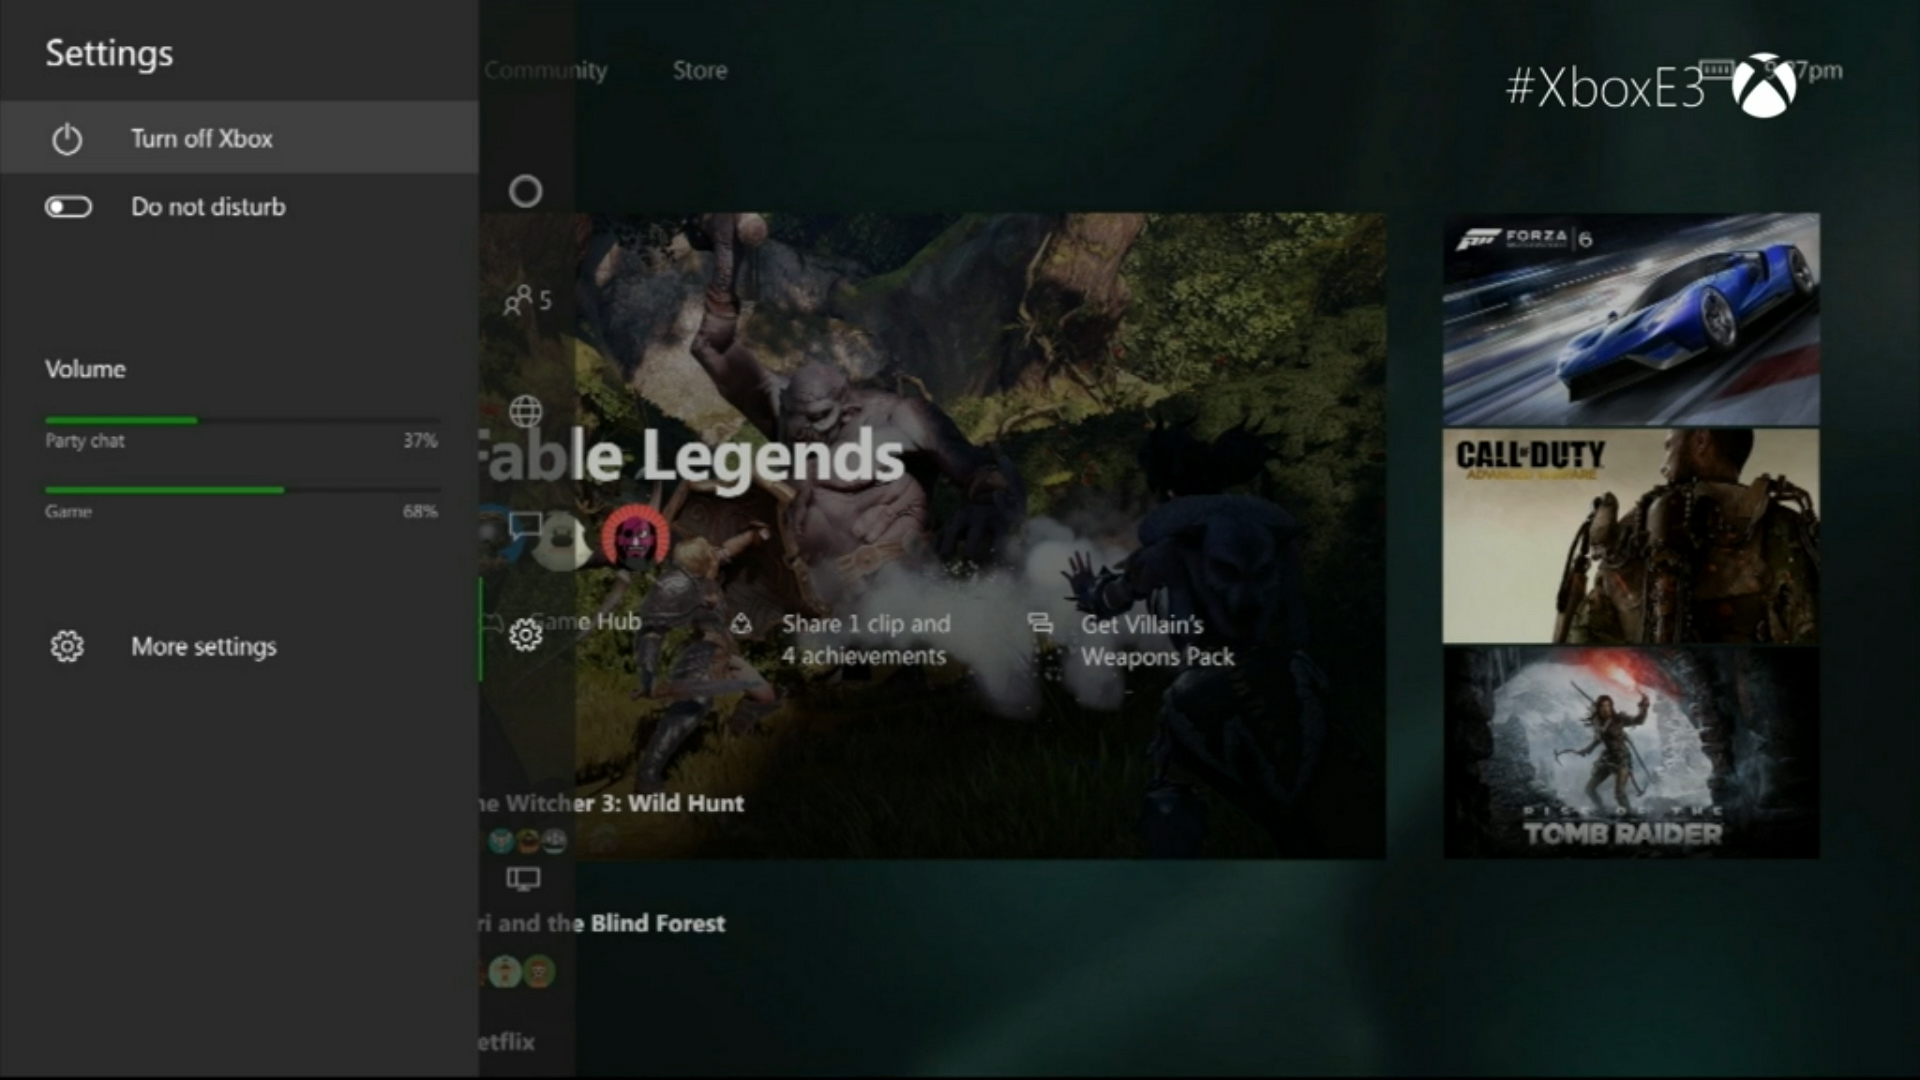 Xbox One New Dashboard User Interface Screens and Video ... - 1920 x 1080 jpeg 521kB